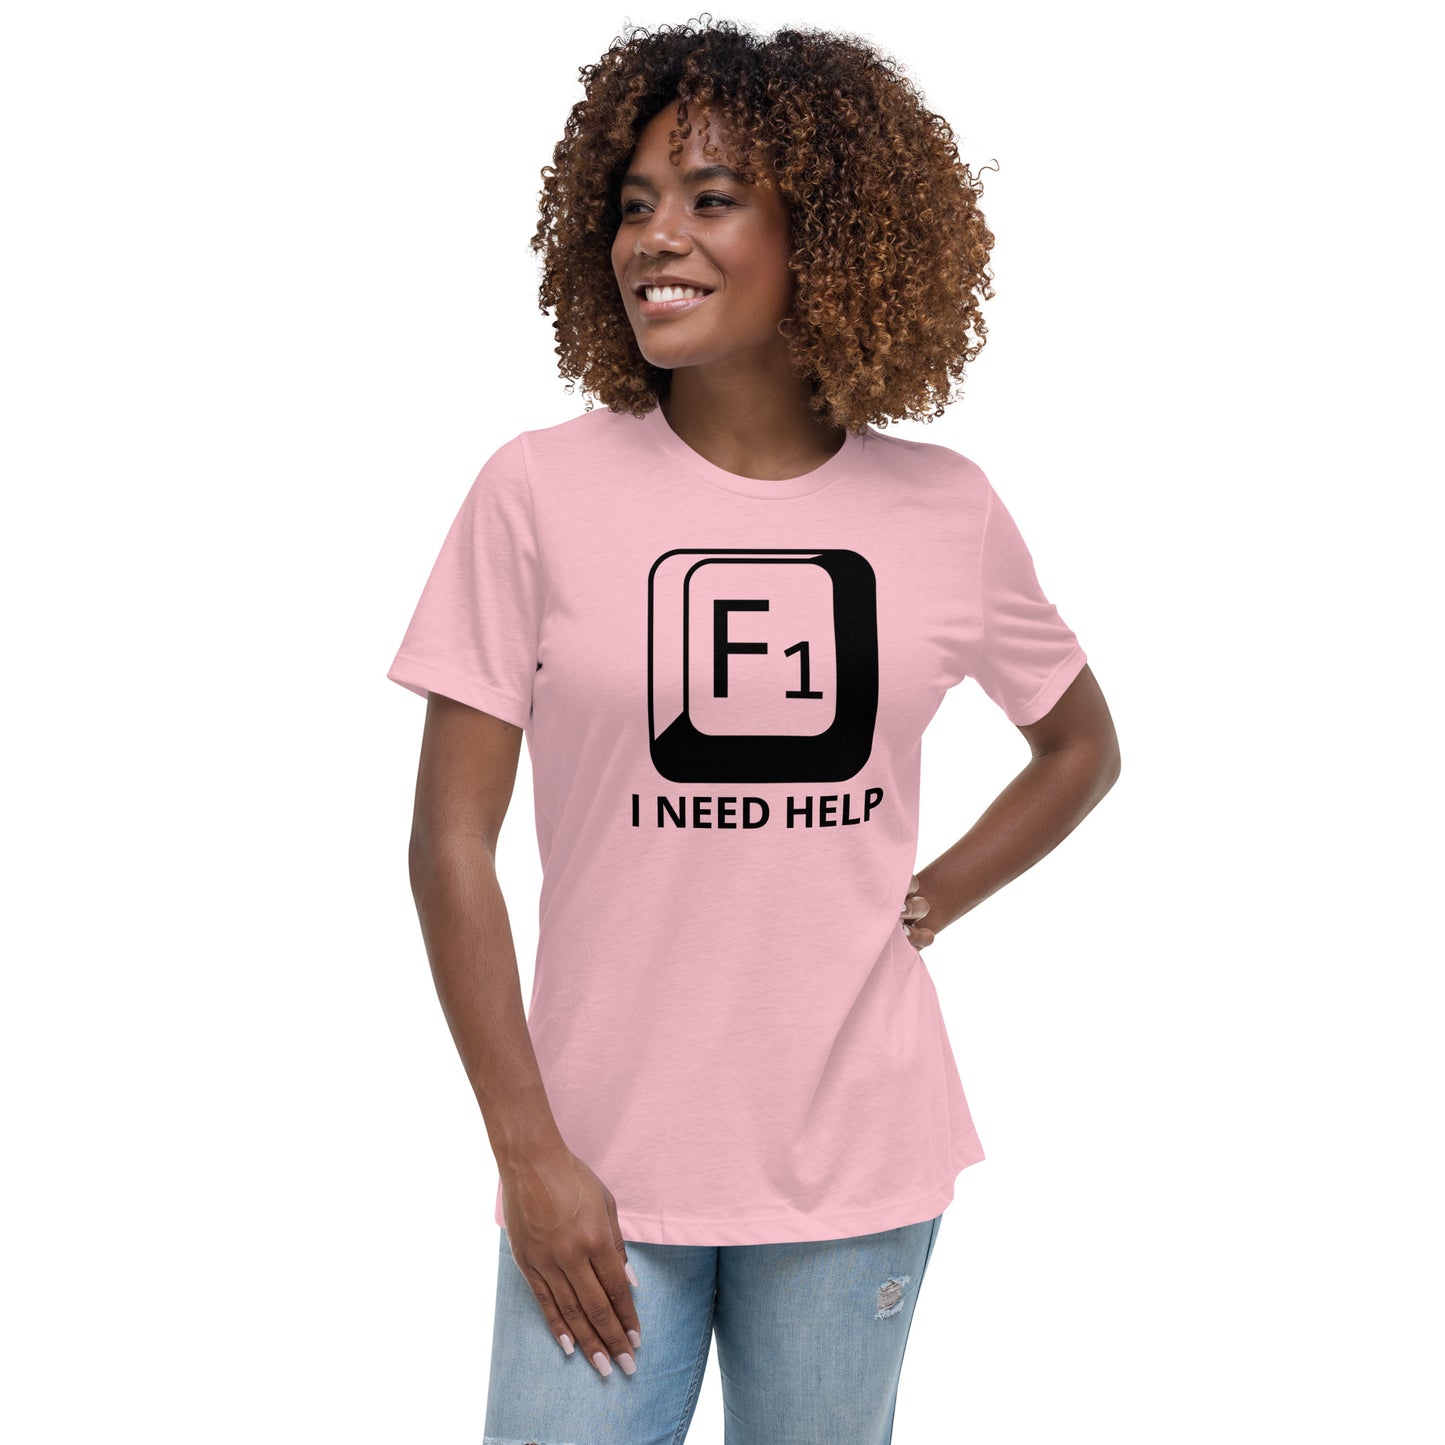 Woman with pink t-shirt with picture of "F1" key and text "I need help"